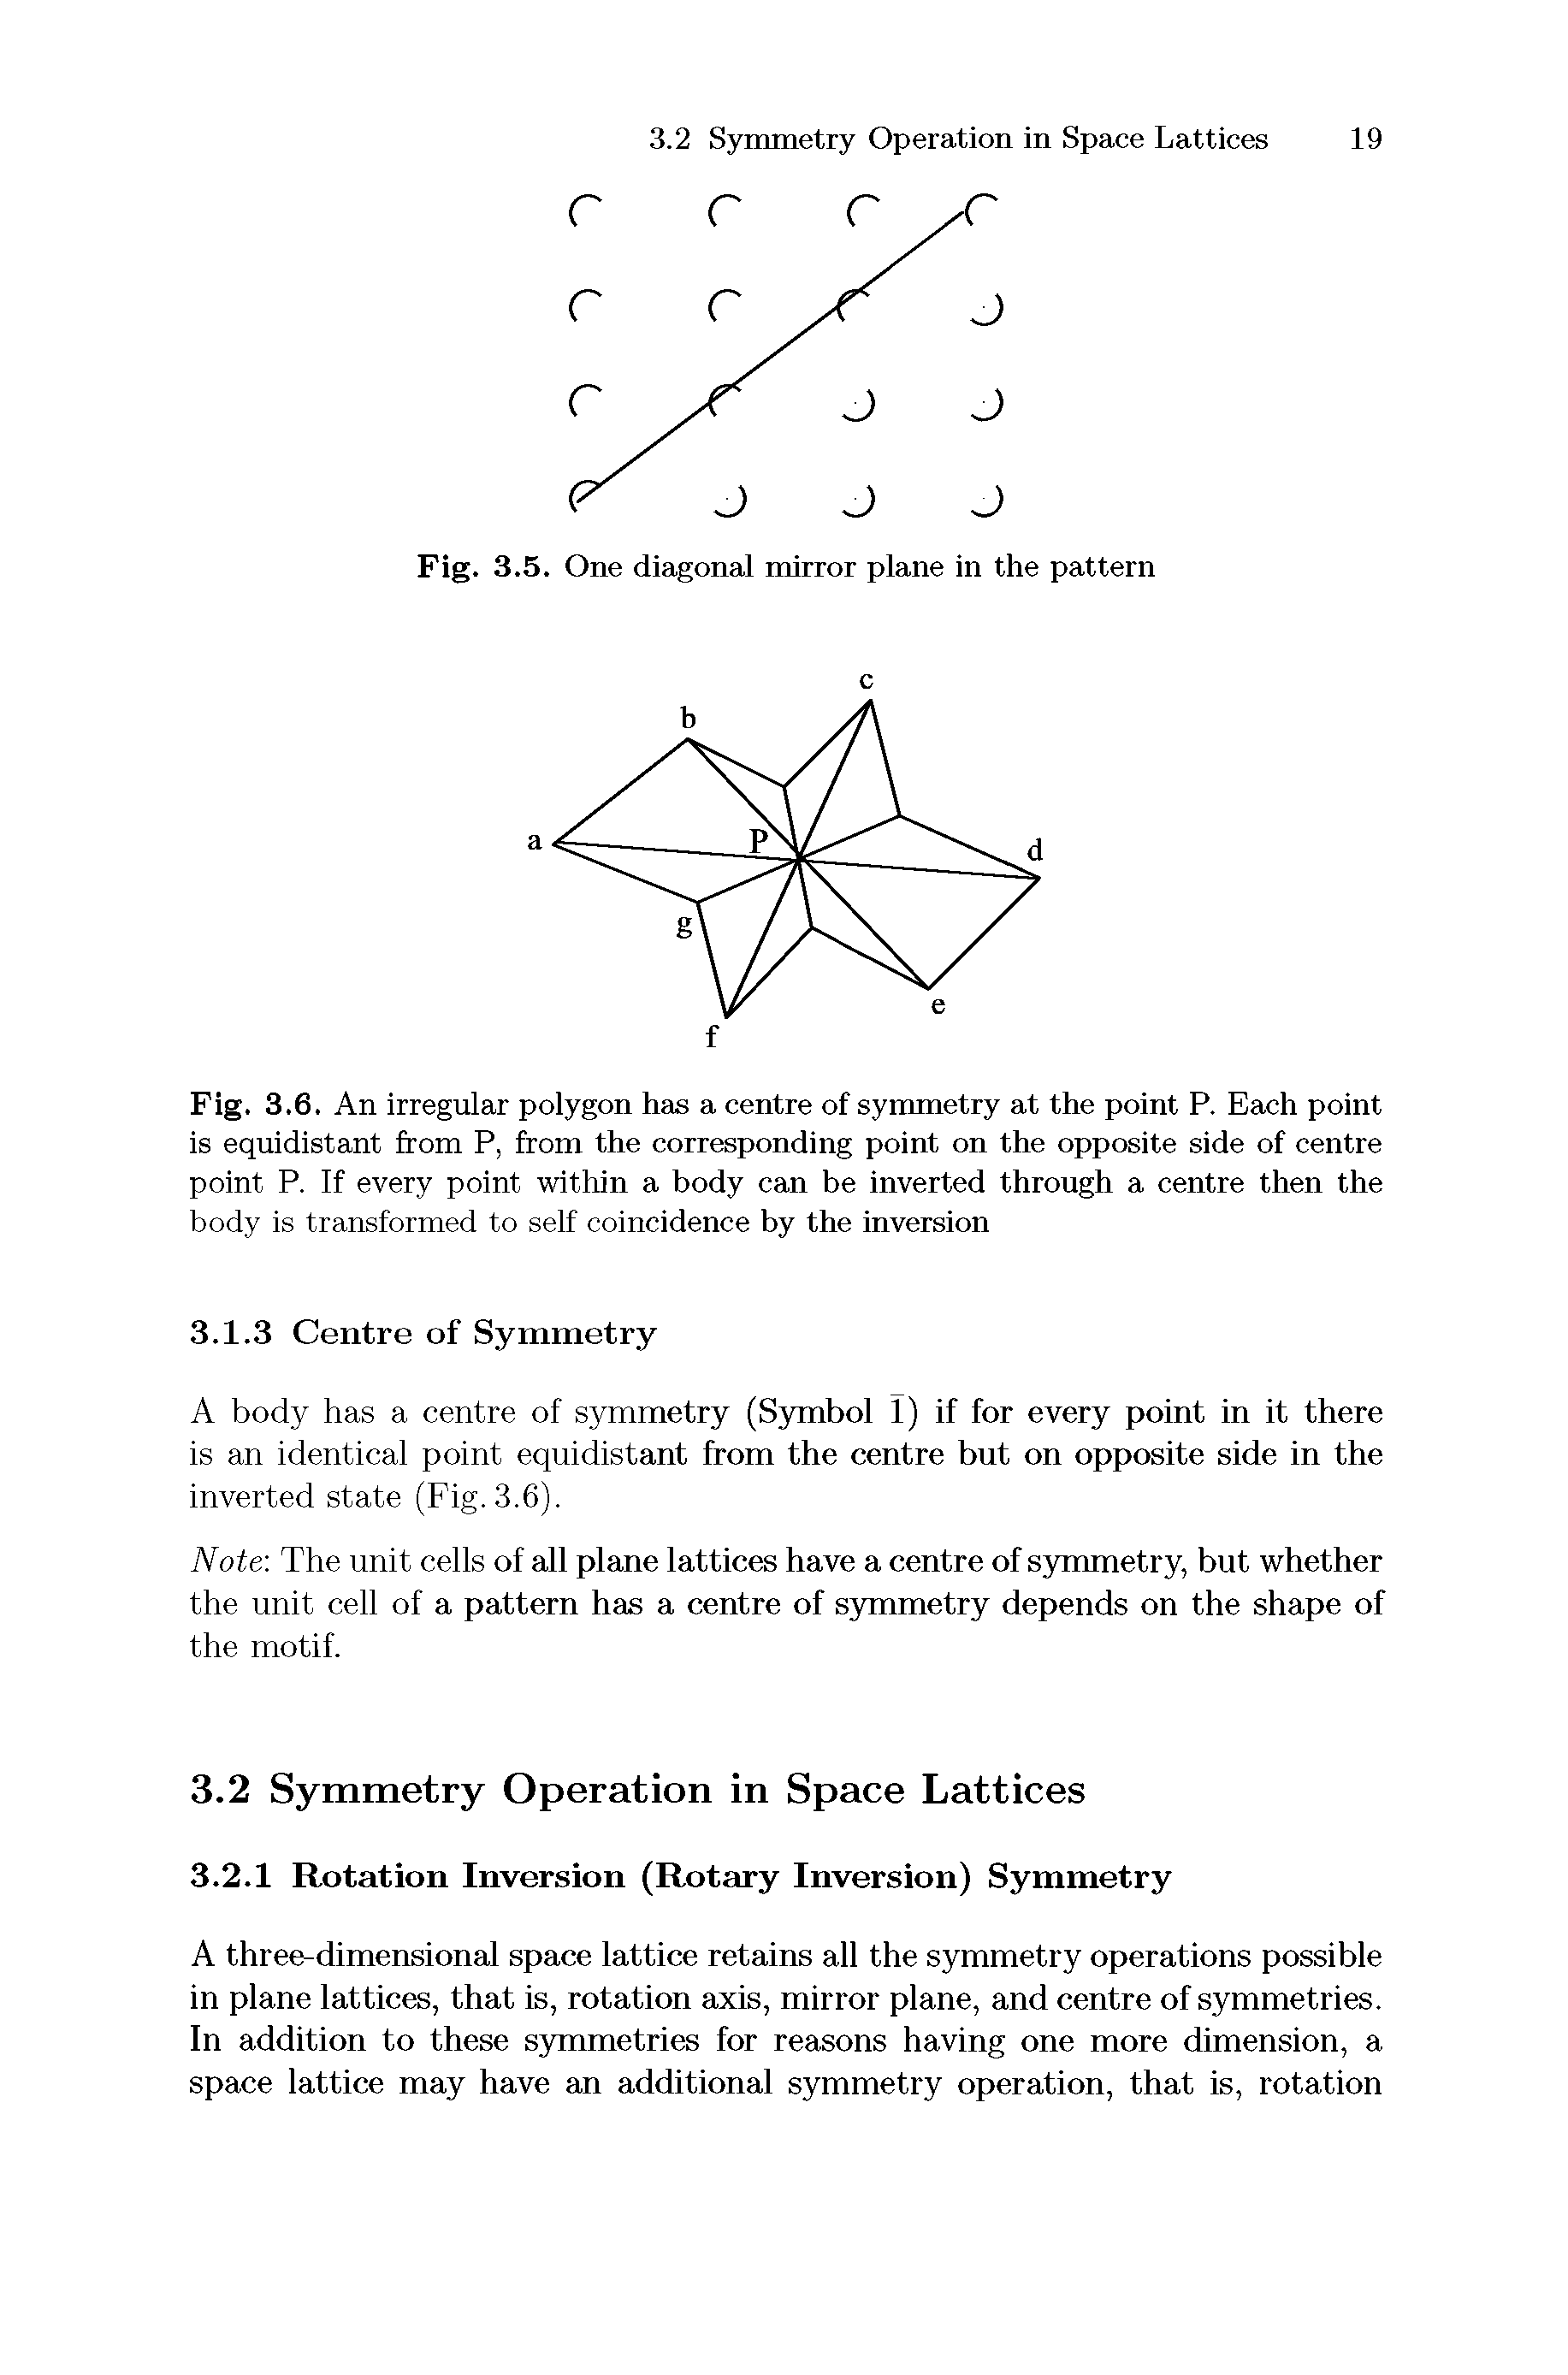 Fig. 3.6. An irregular polygon has a centre of symmetry at the point P. Each point is equidistant from P, from the corresponding point on the opposite side of centre point P. If every point within a body can be inverted through a centre then the body is transformed to self coincidence by the inversion...